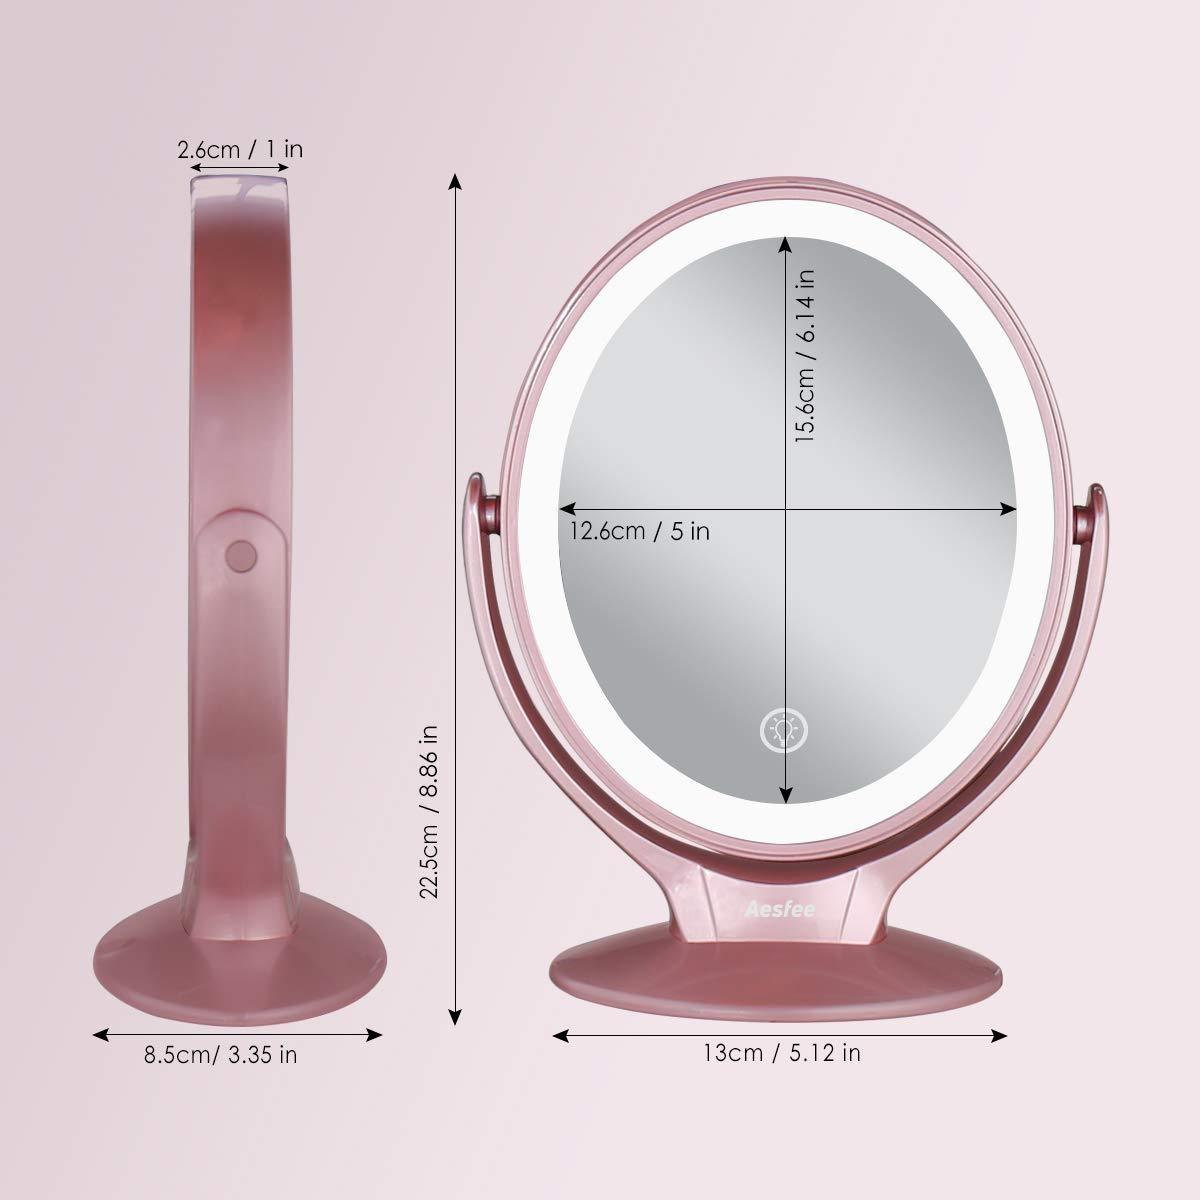 Aesfee LED Lighted Makeup Vanity Mirror Rechargeable,1x/7x Magnification  Double Sided 360 Degree Swivel Magnifying Mirror with Dimmable Touch  Screen, Portable Tabletop Illuminated Mirrors Rose Gold